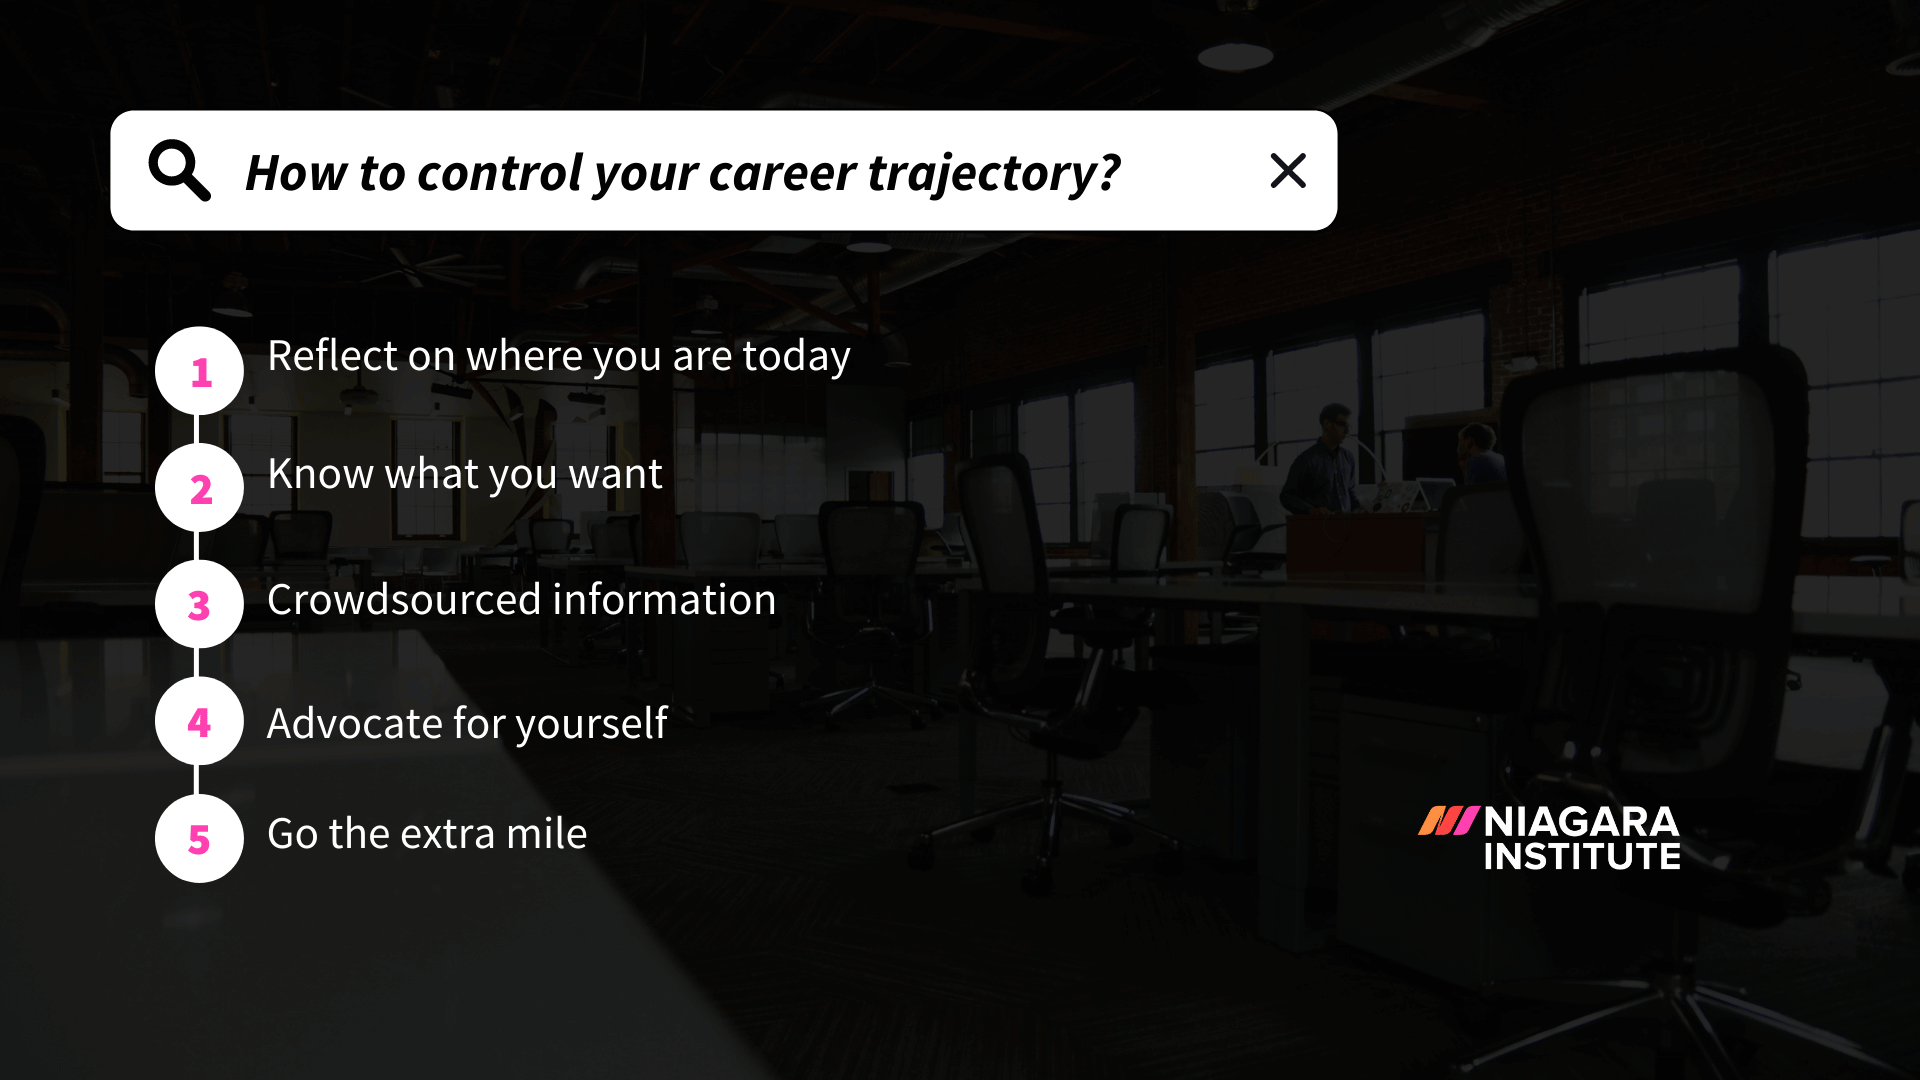 How To Control Your Career Trajectory - Niagara Institute (2)